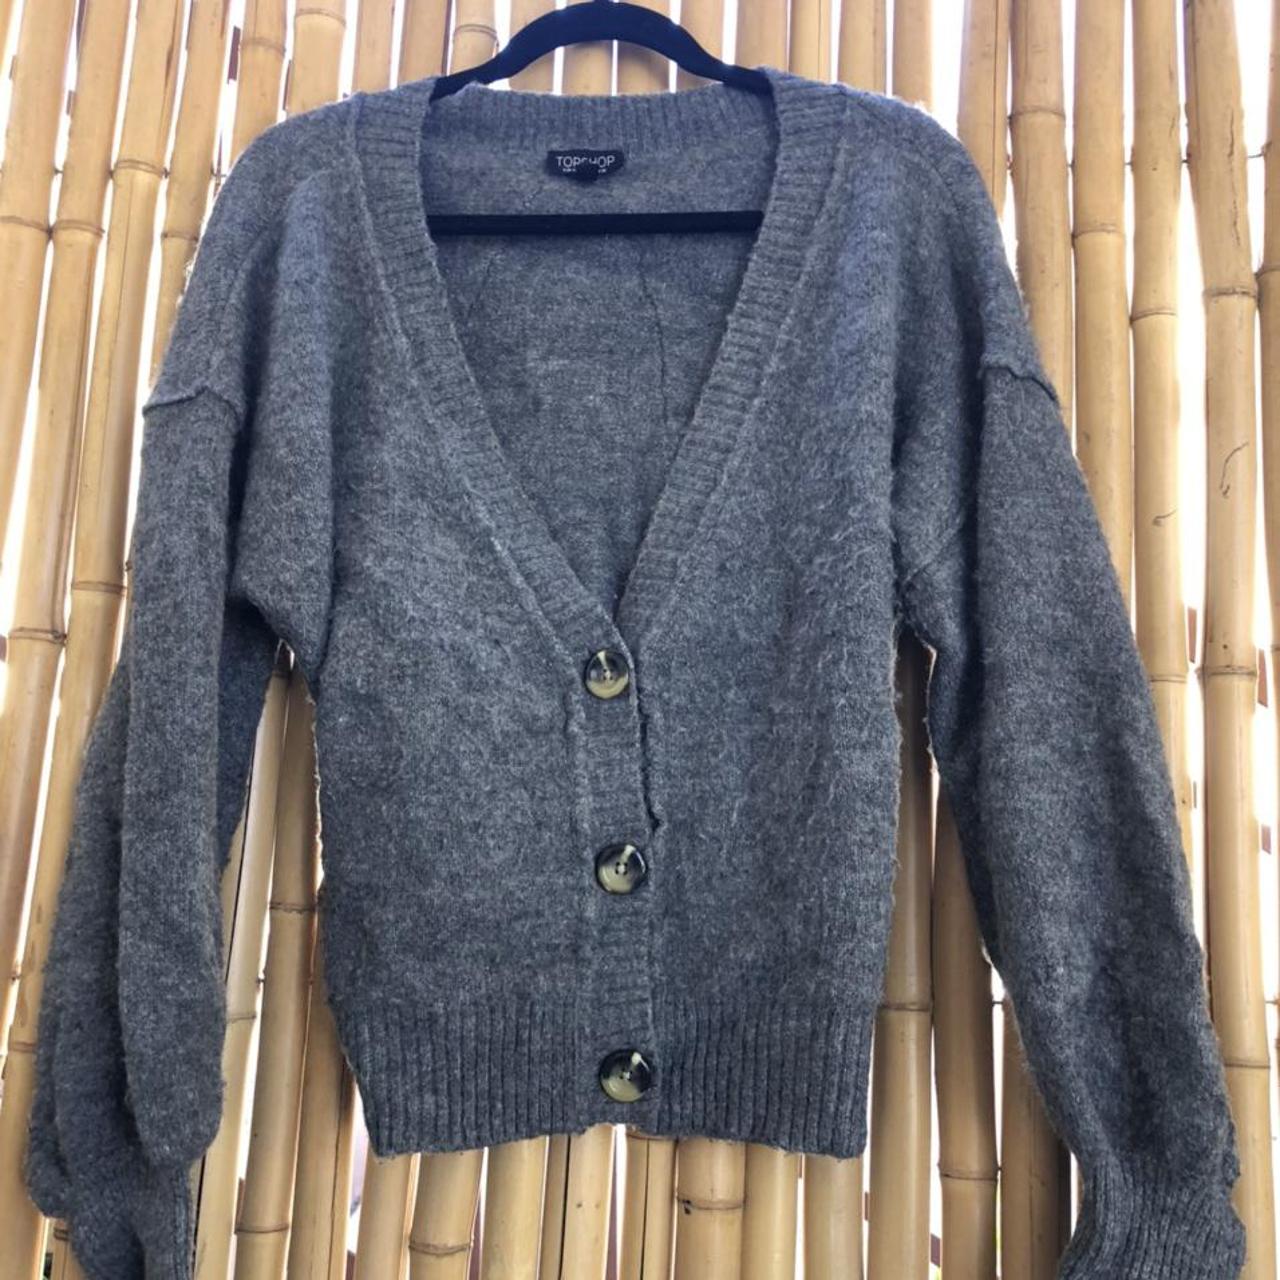 Grey cardigan sweater from Topshop. Cute with a... - Depop